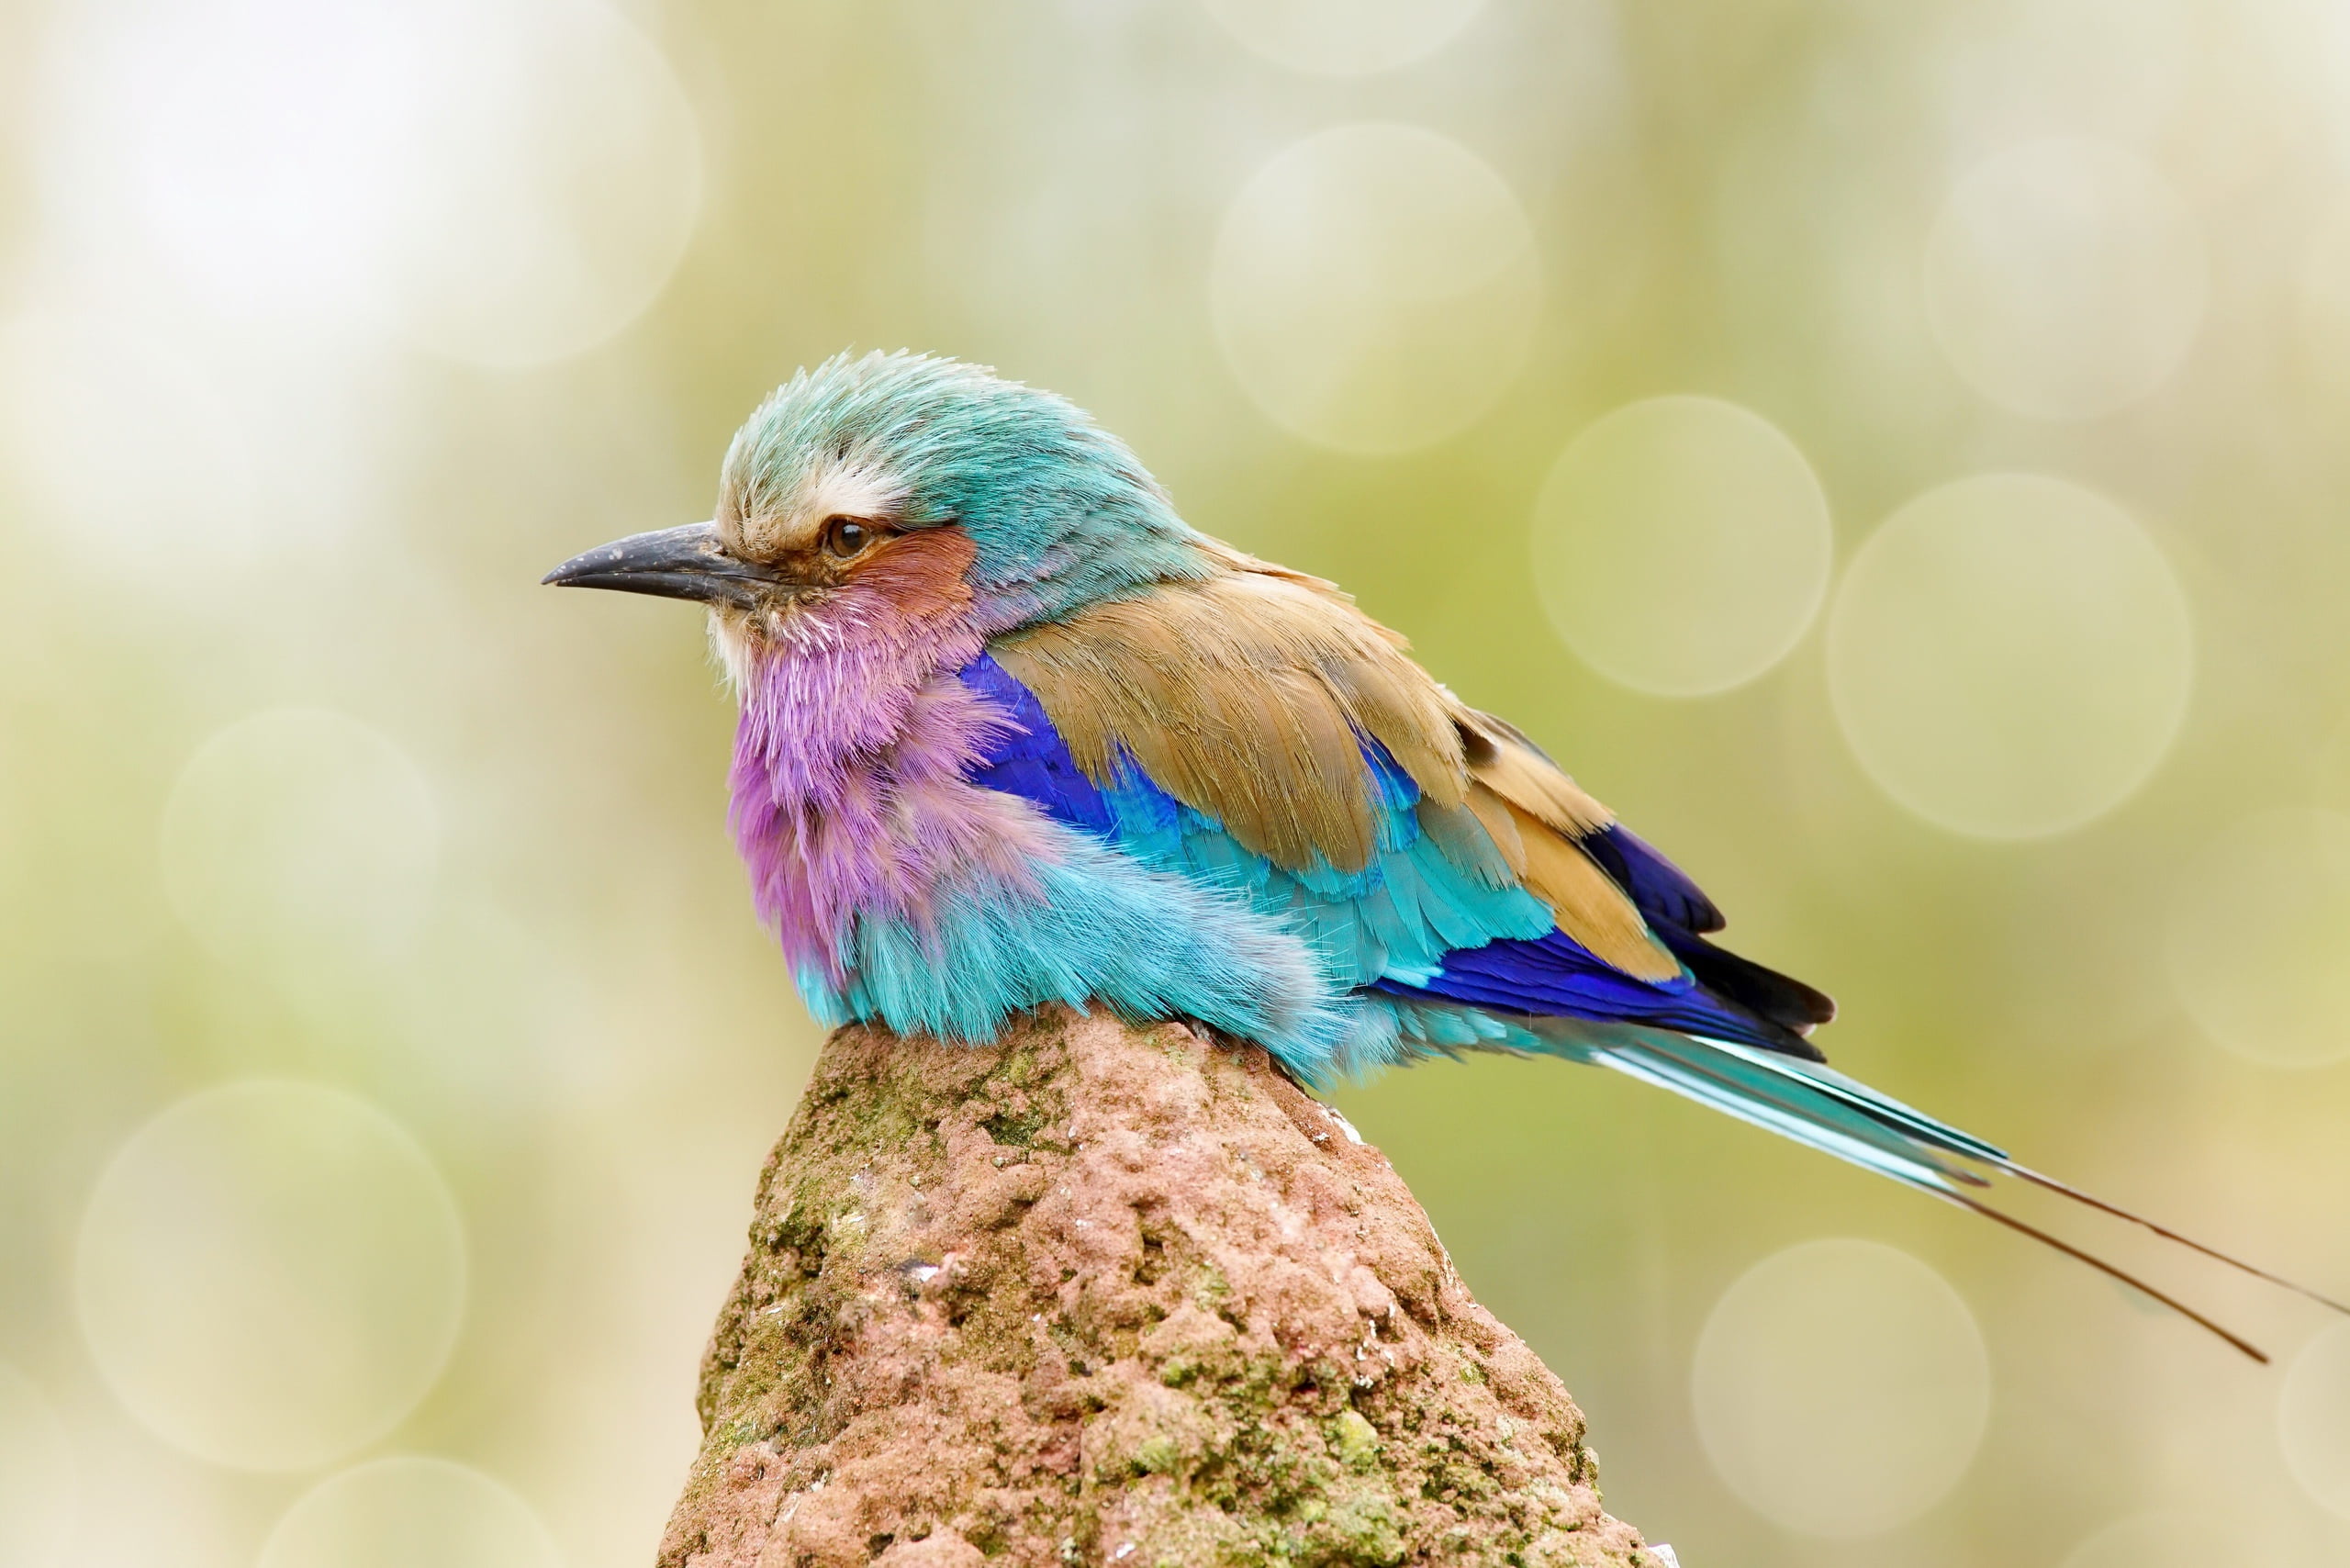 purple, teal, brown and blue bird, colorful, birds, animals, bokeh